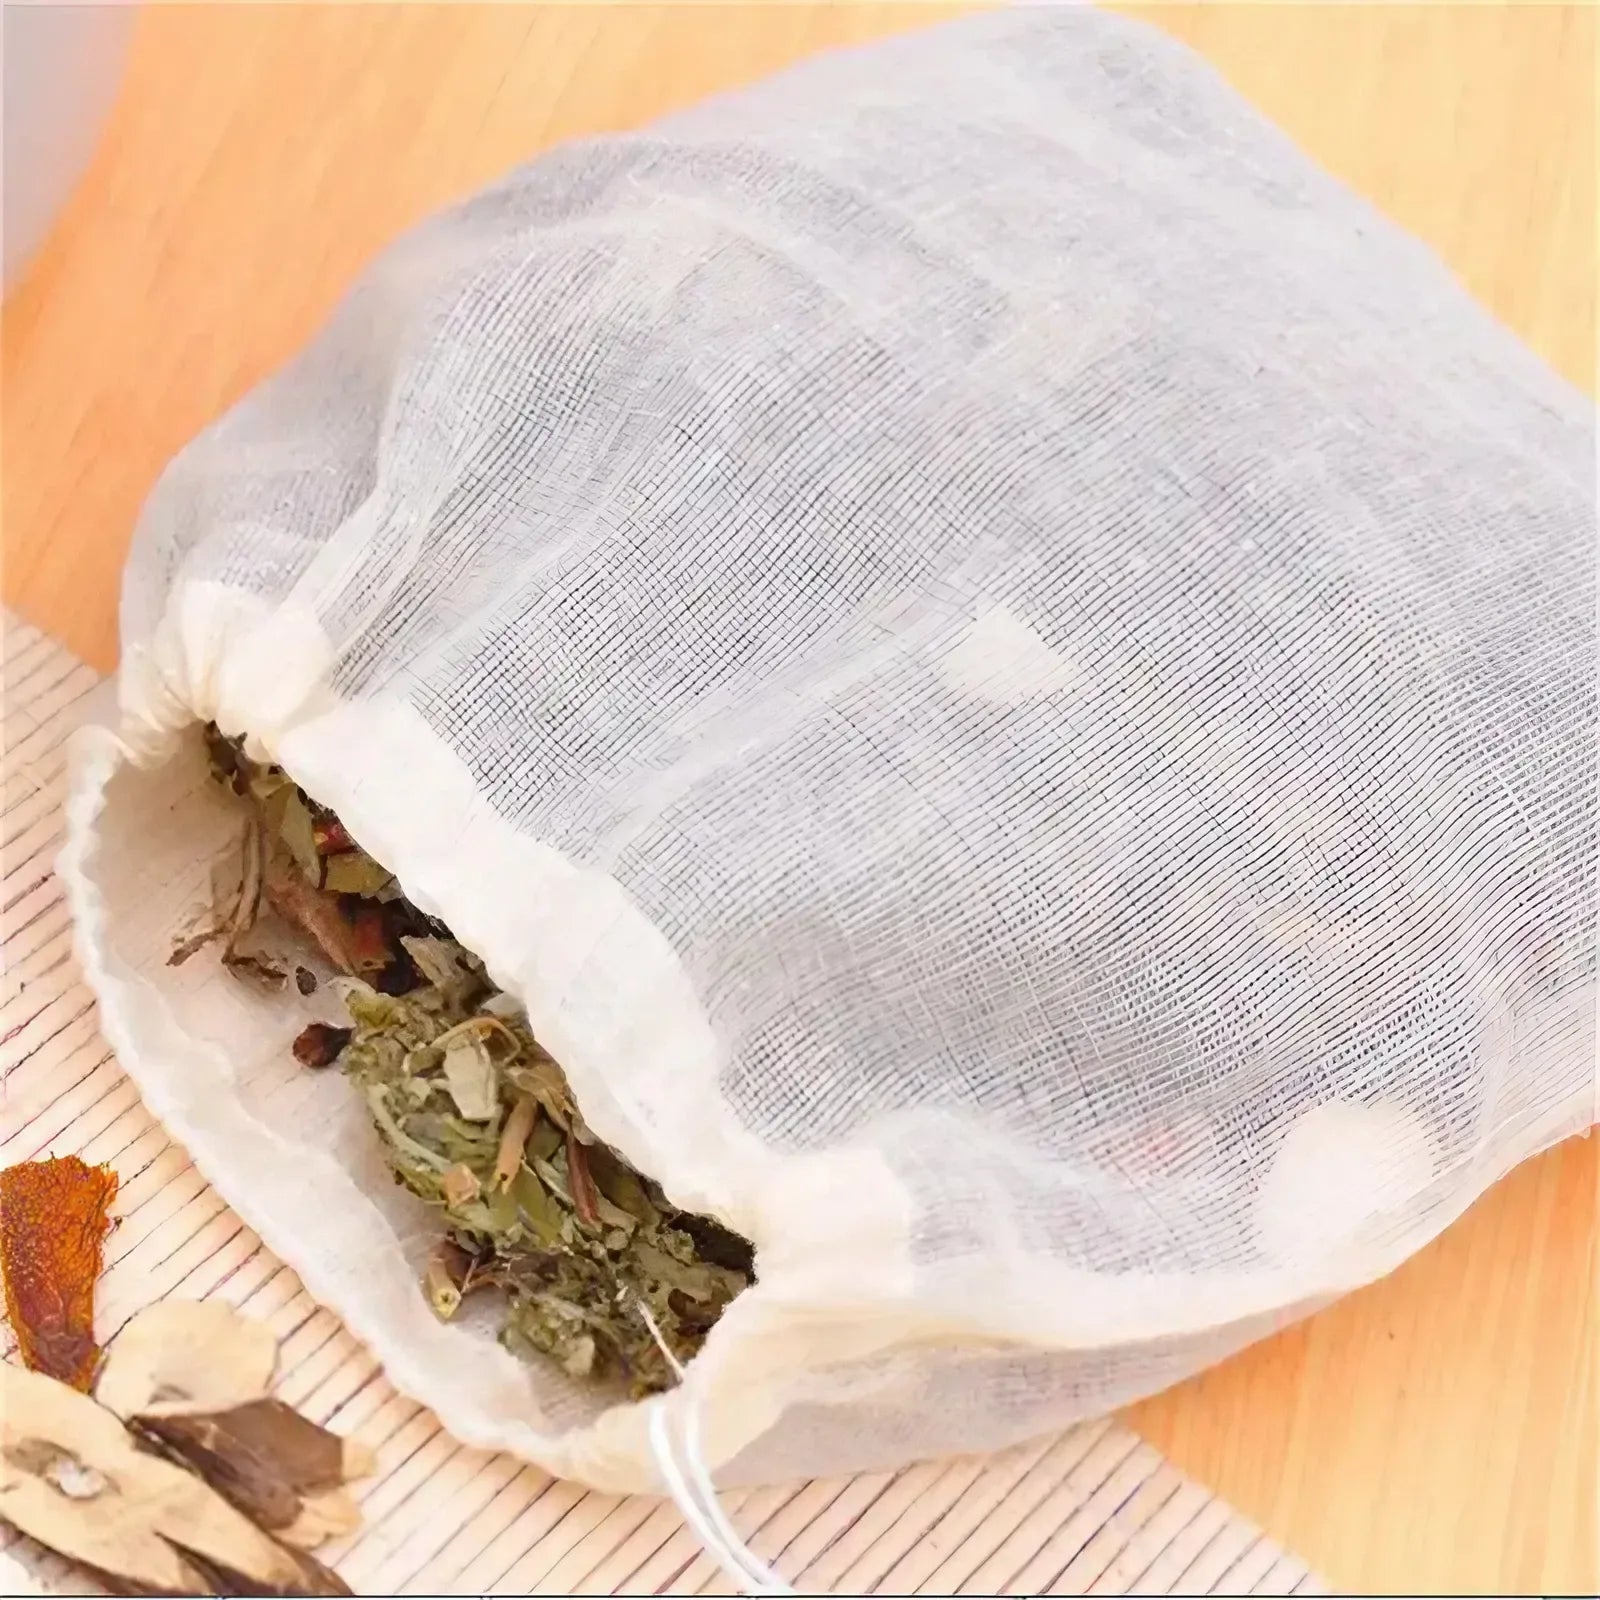 Cotton Muslin Drawstring Reusable Bags for Teas, Herbs, and Spice mi maiv